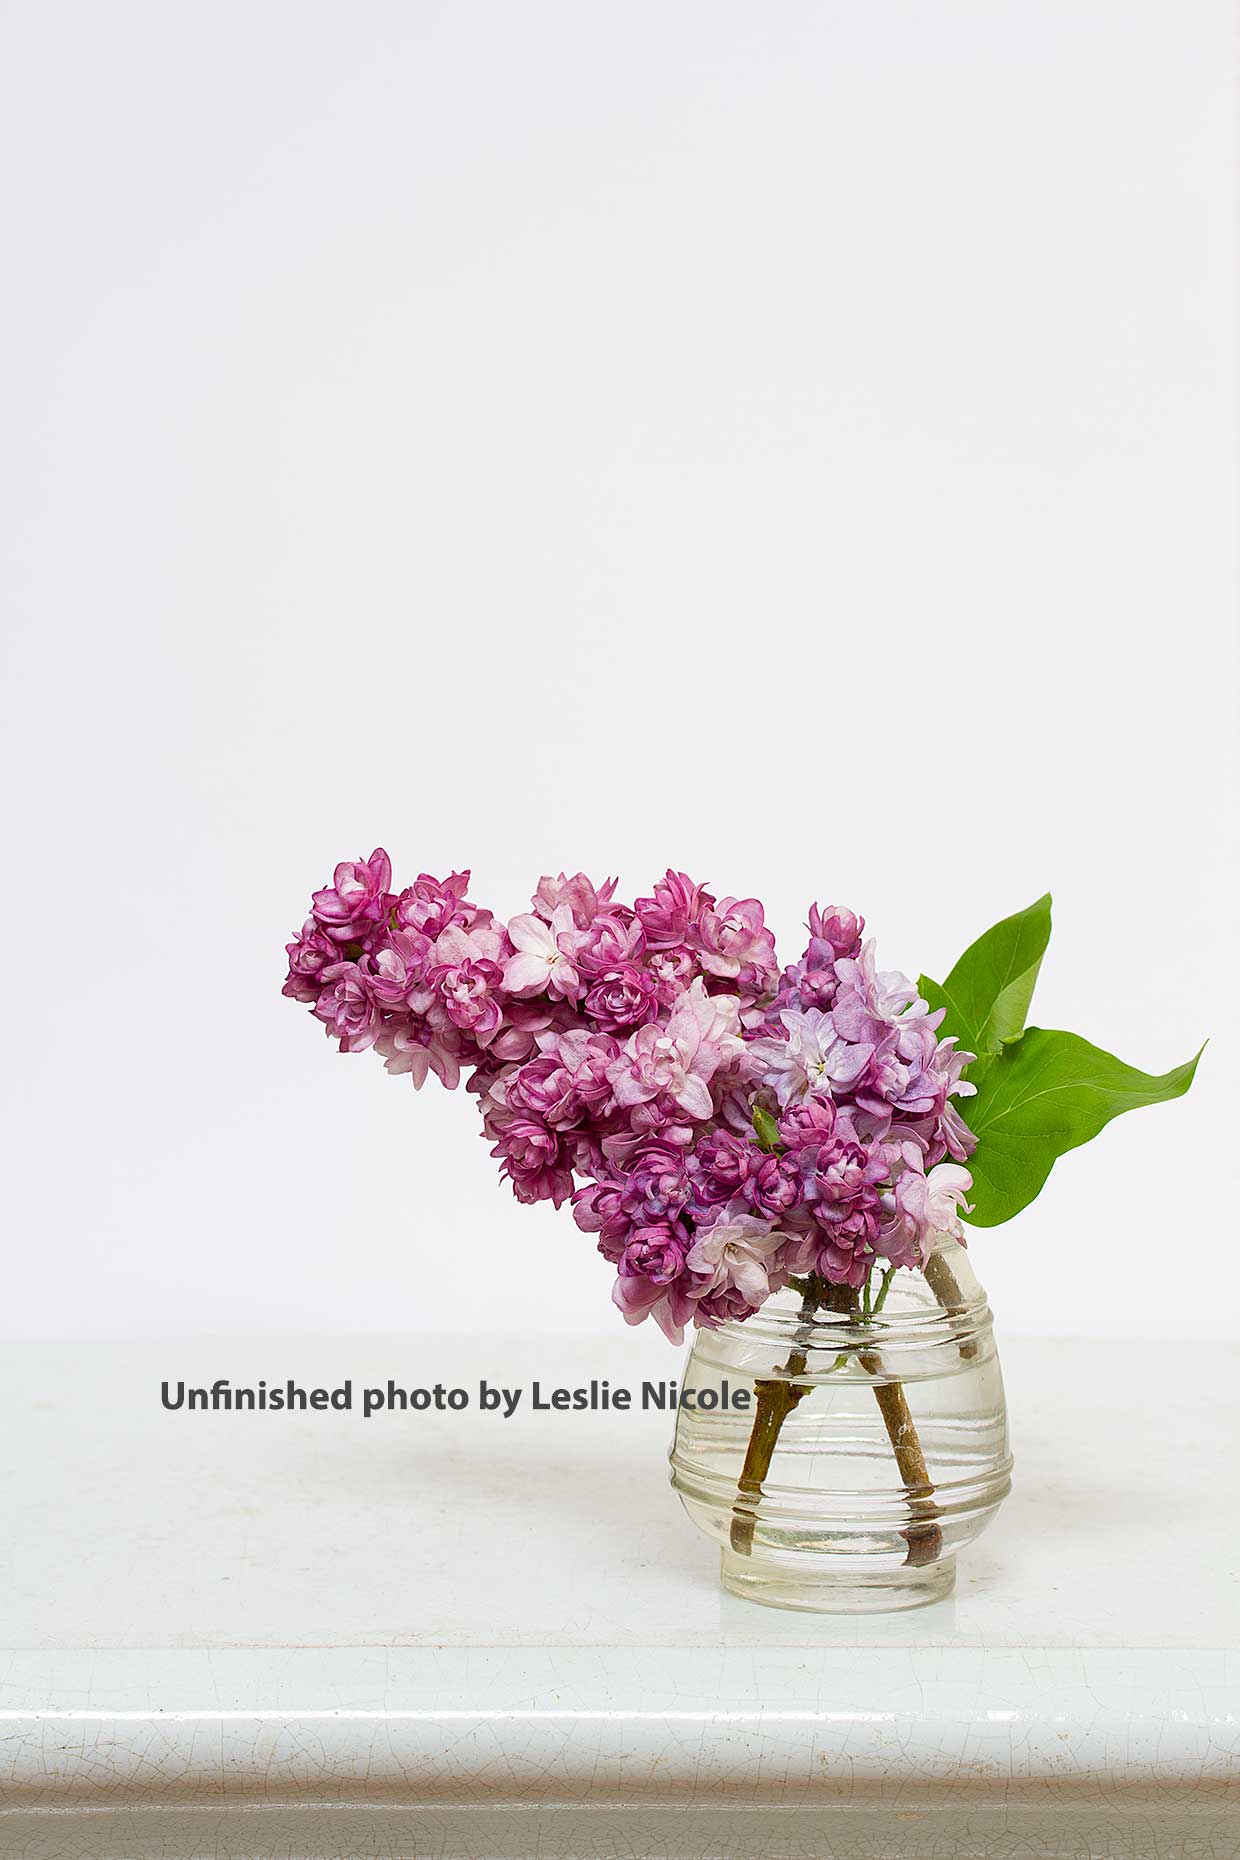 Original photo of Lilac floral before post-processing.